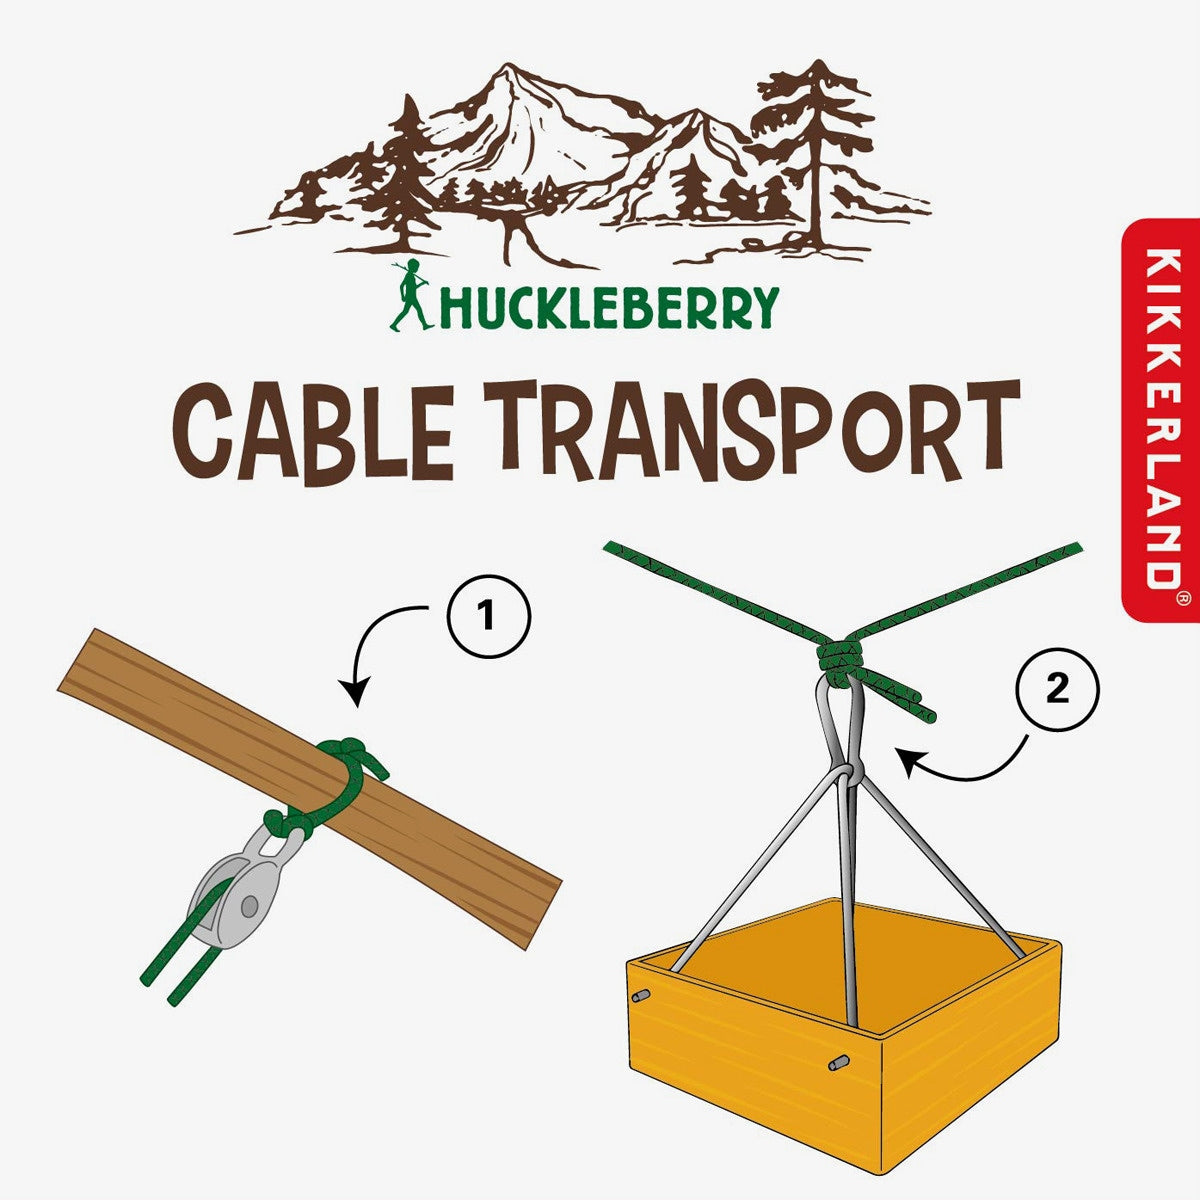 Cable Transport - Huckleberry